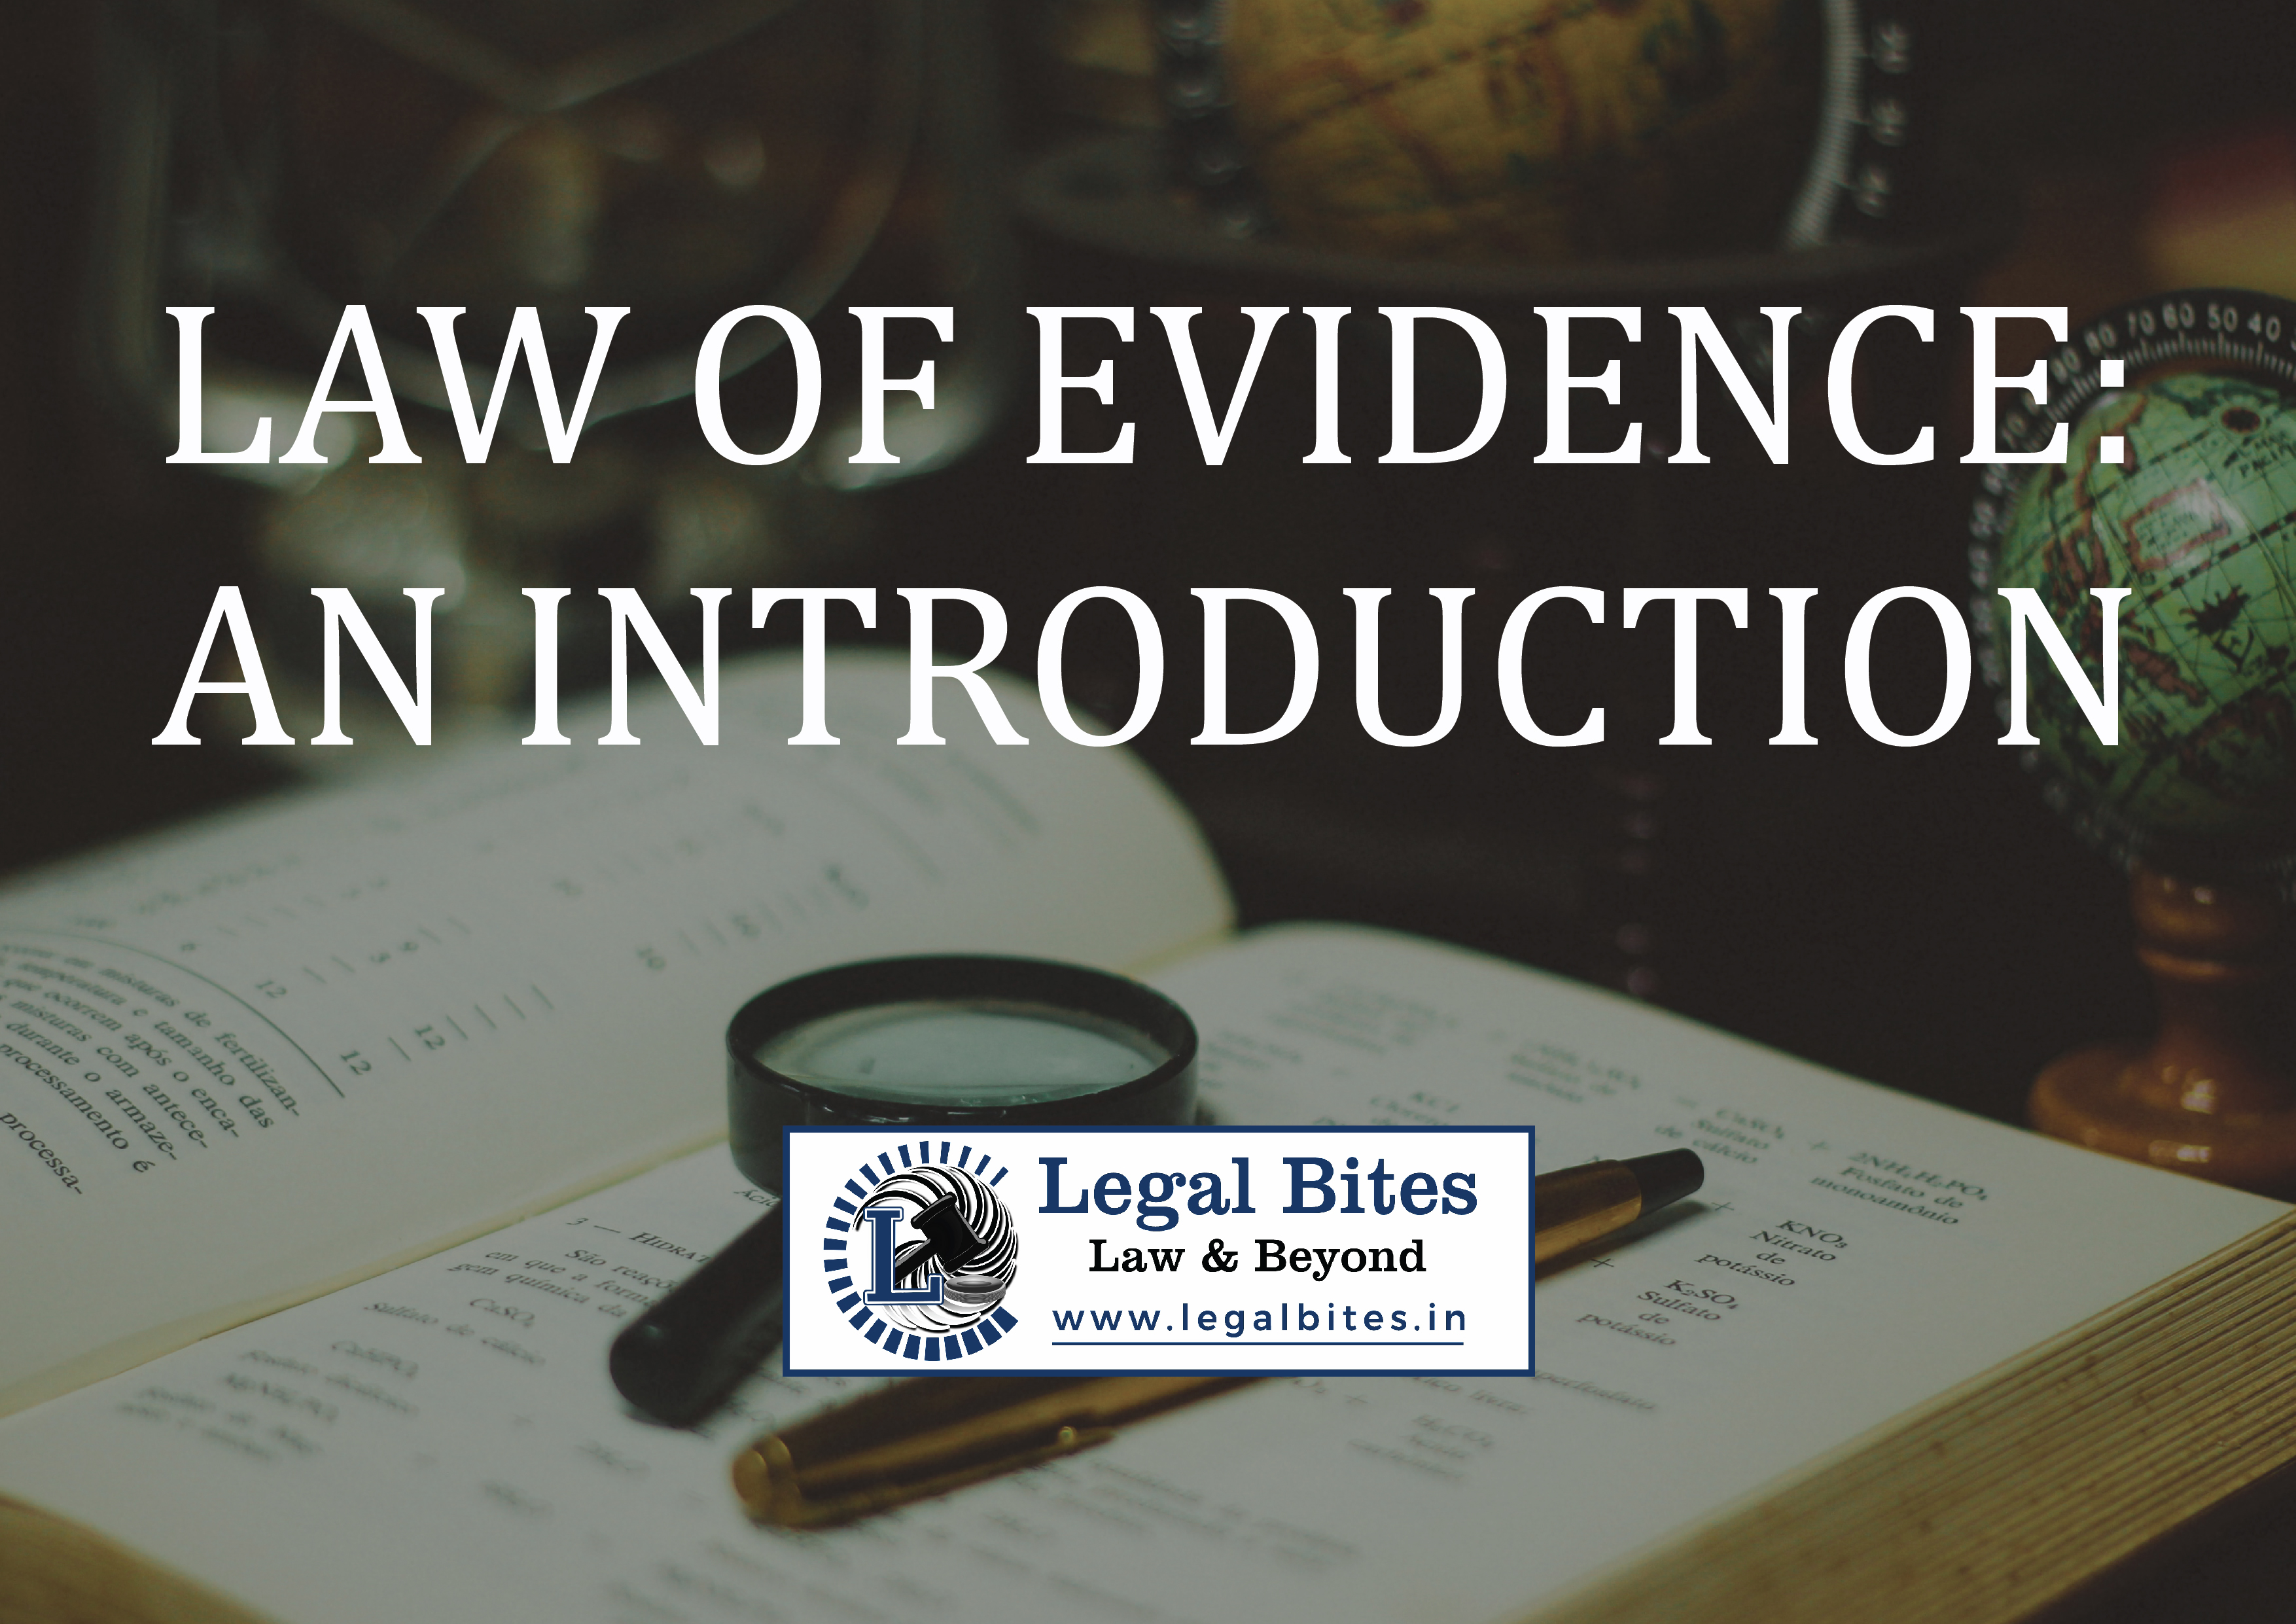 The Law of Evidence: An Introduction